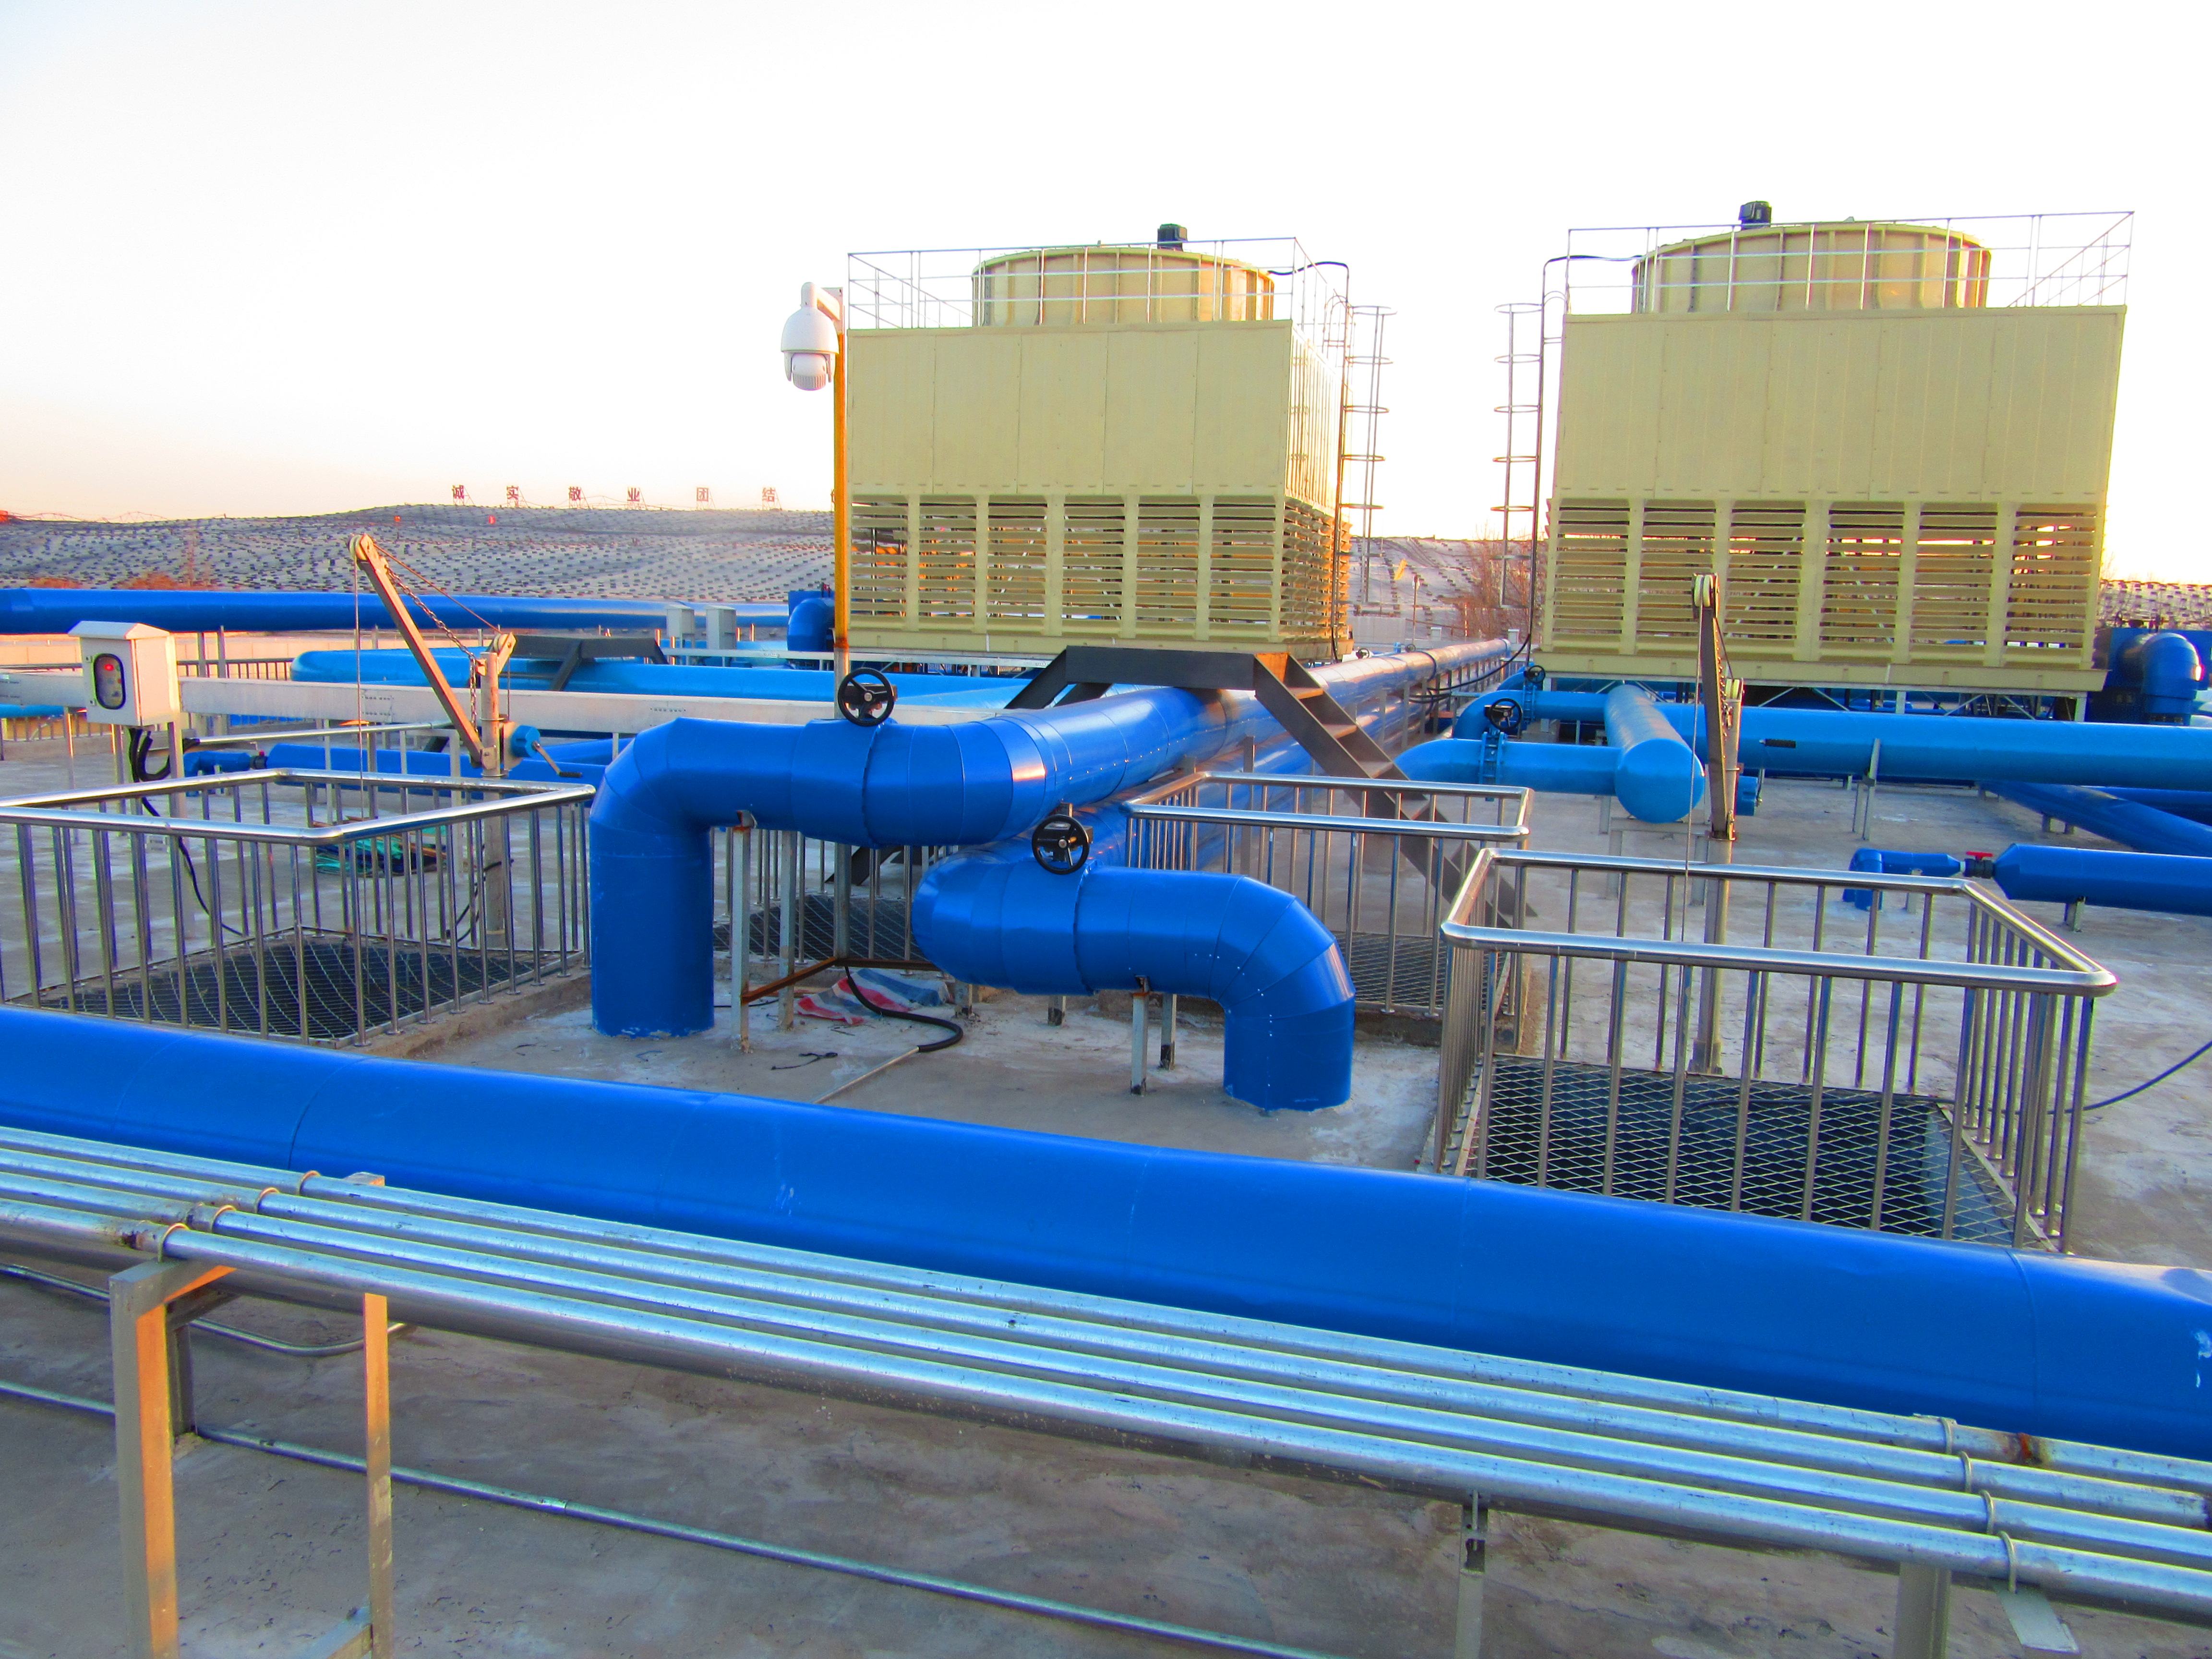 Shenyang Laohuchong MSW Landfill Leachate Treatment Project